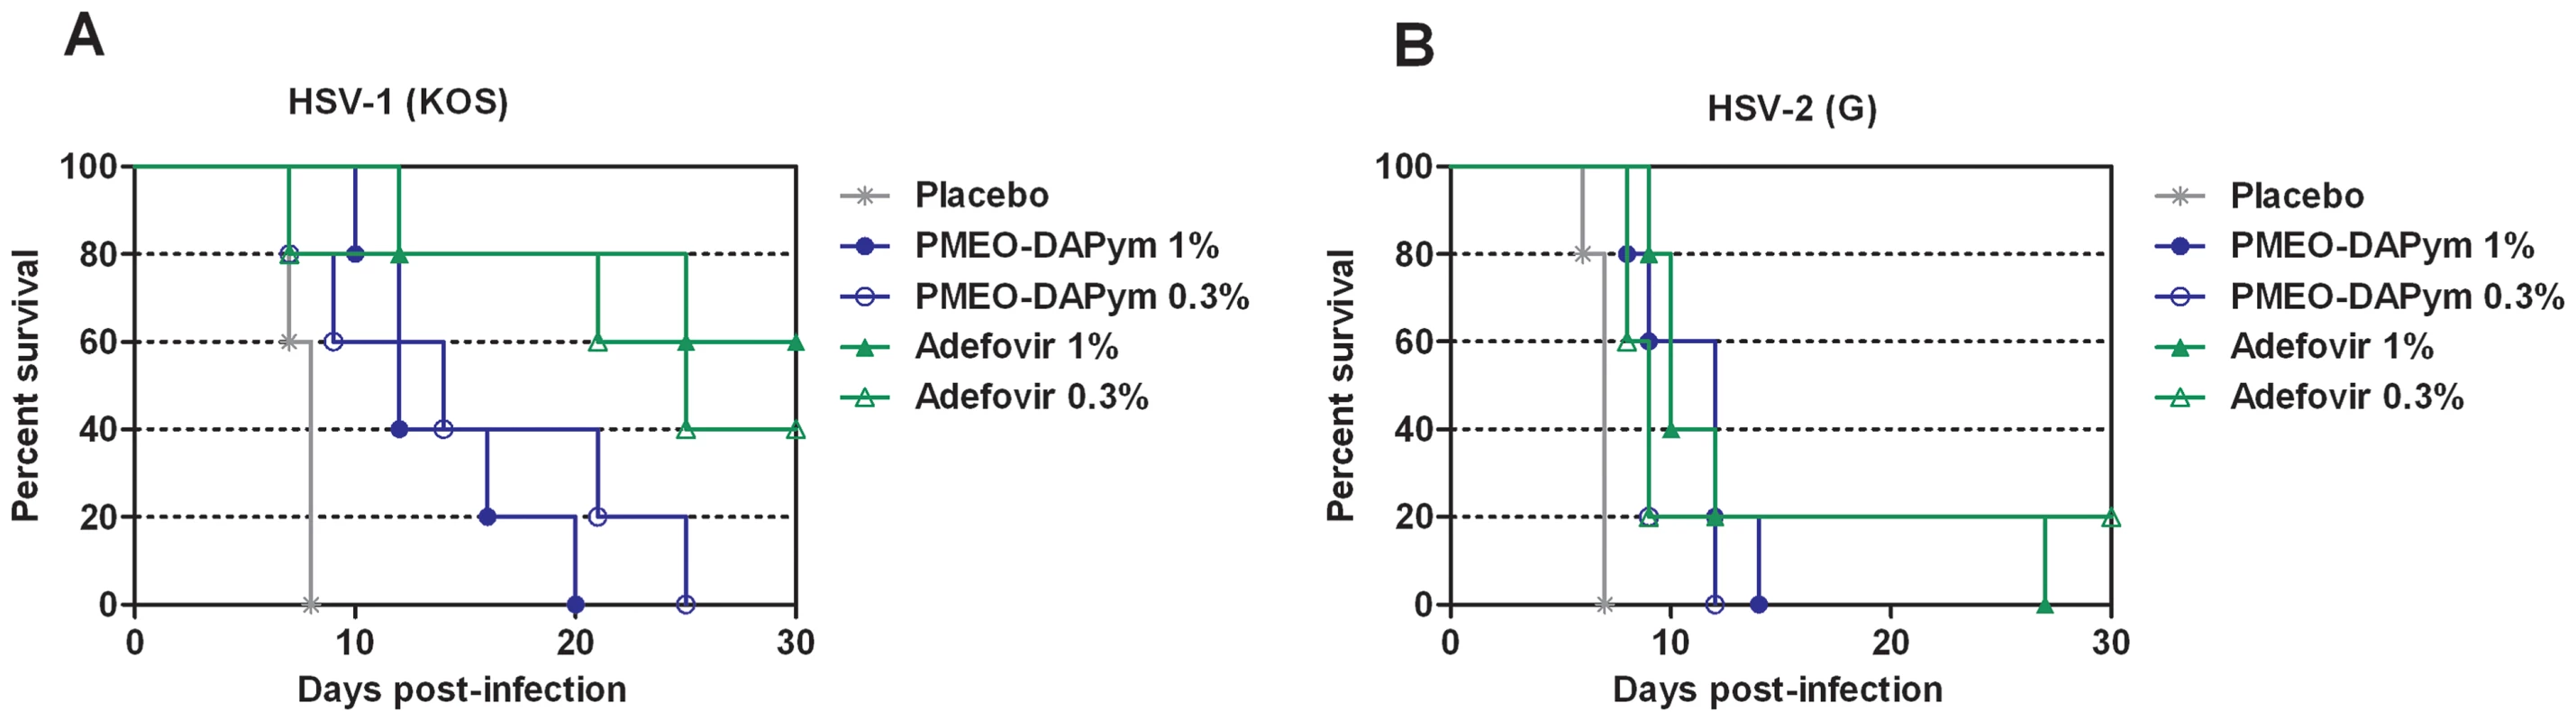 Effects of adefovir and PMEO-DAPym on mortality in mice inoculated with HSV-1 or HSV-2.